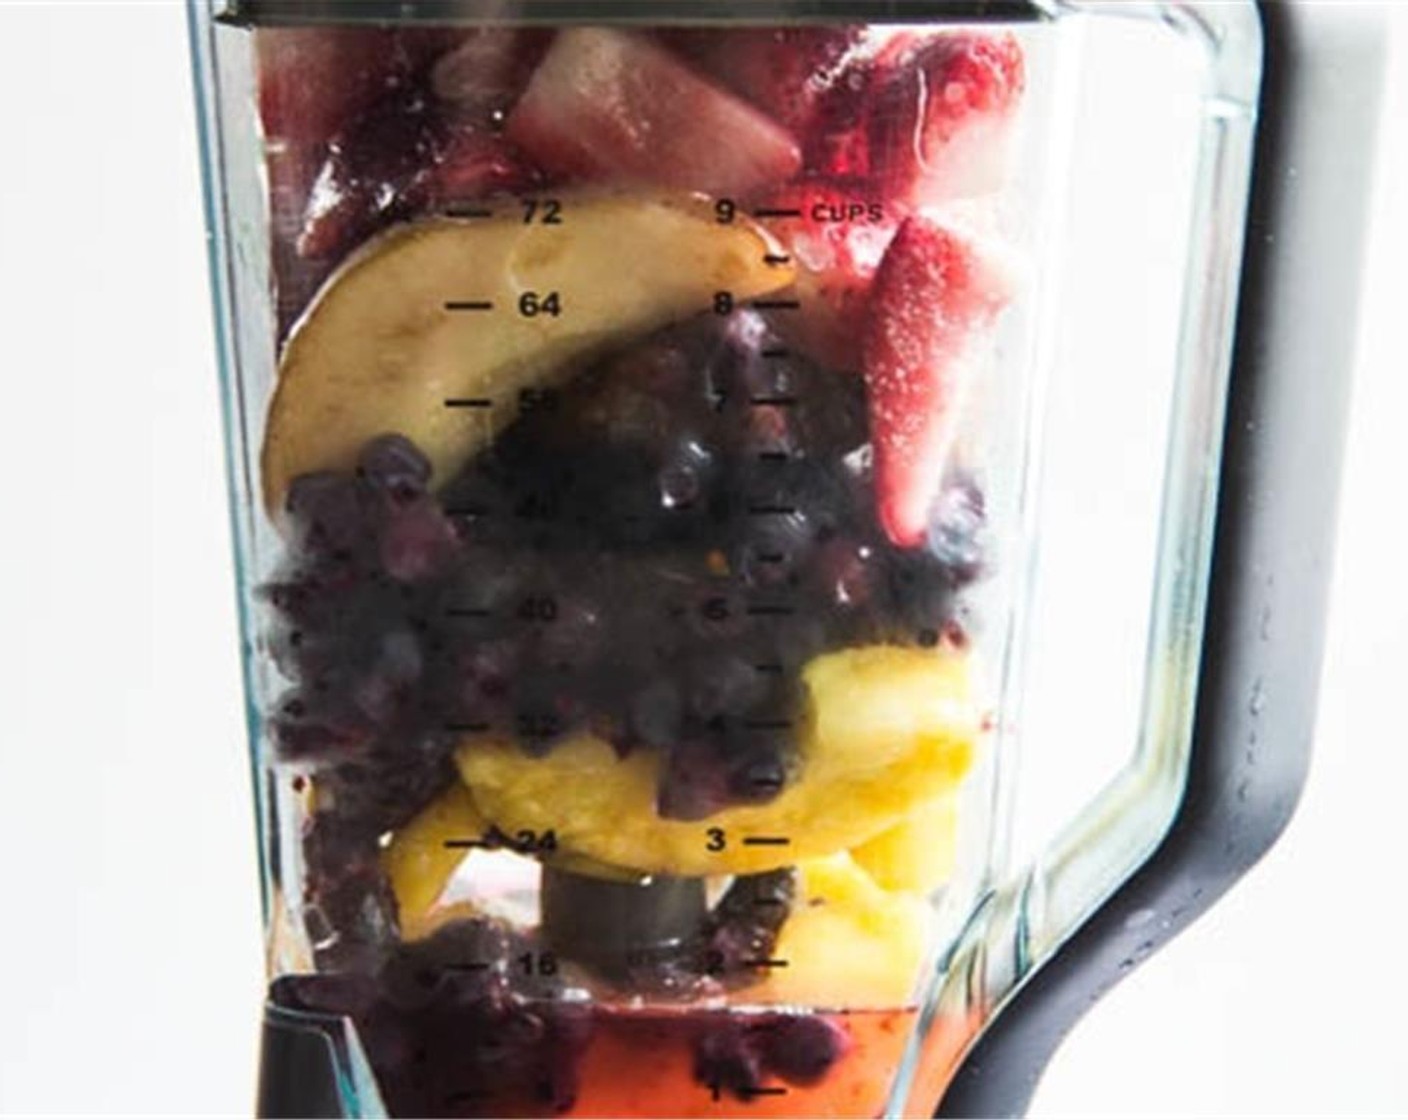 step 1 Combine the Frozen Pineapples (4 slices), Frozen Strawberries (2 cups), Pear (1), Frozen Blueberries (2 cups), and Water (2 cups) in a blender and blend until smooth.